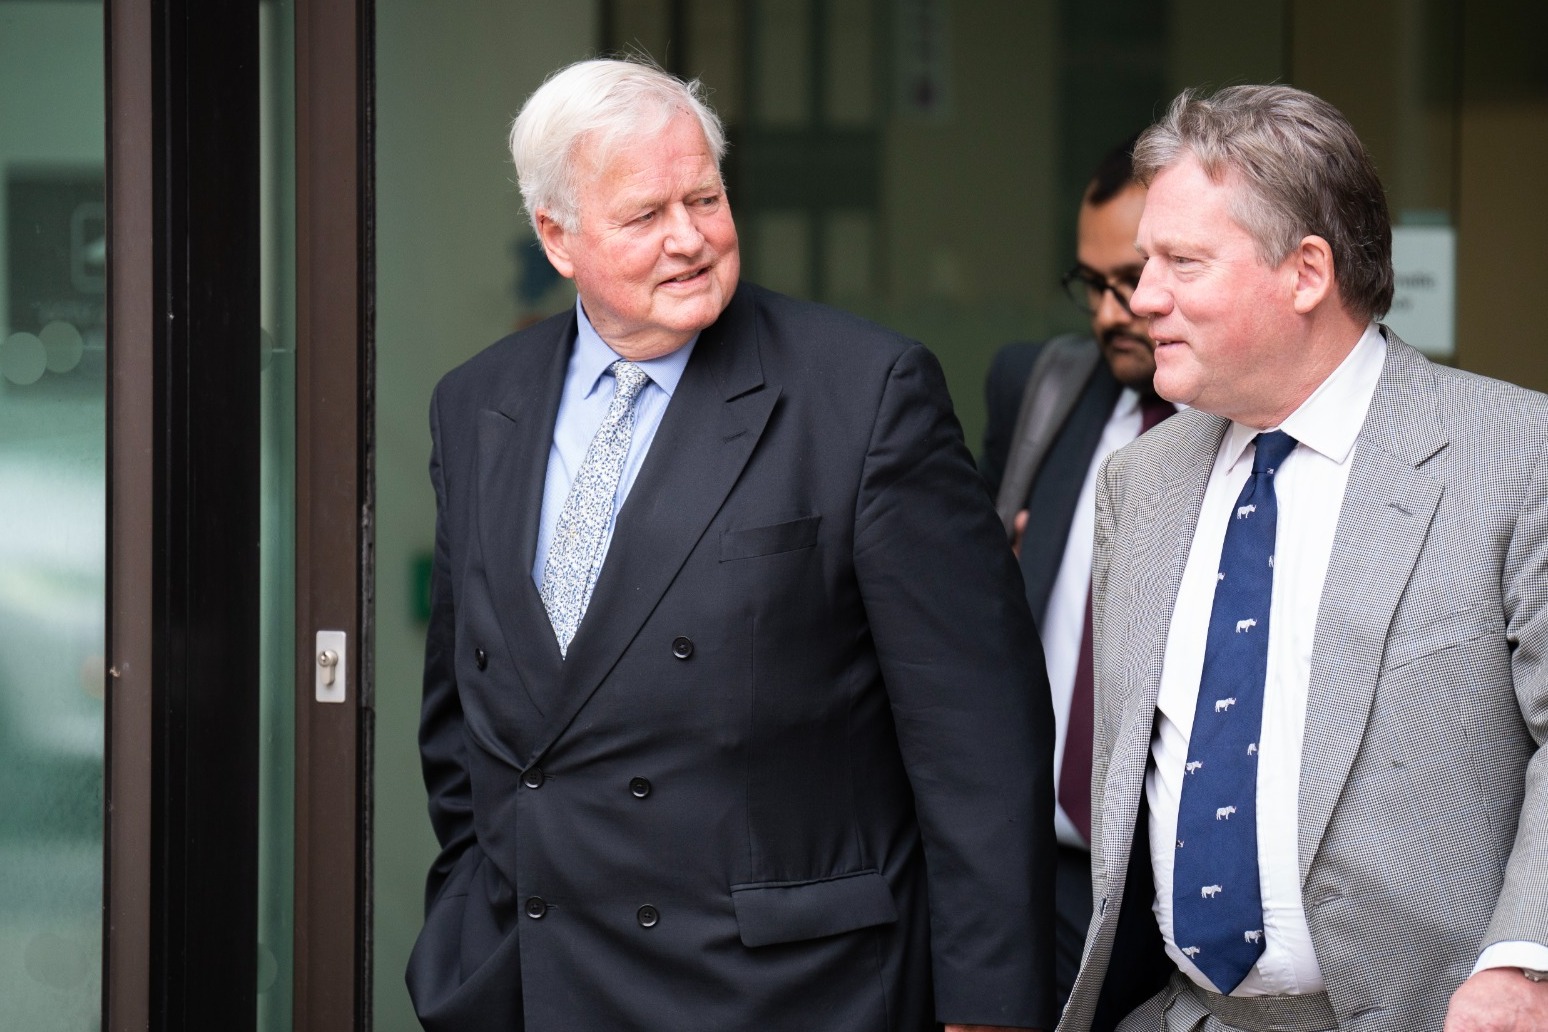 Tory MP Bob Stewart pleads not guilty to racially abusing man 